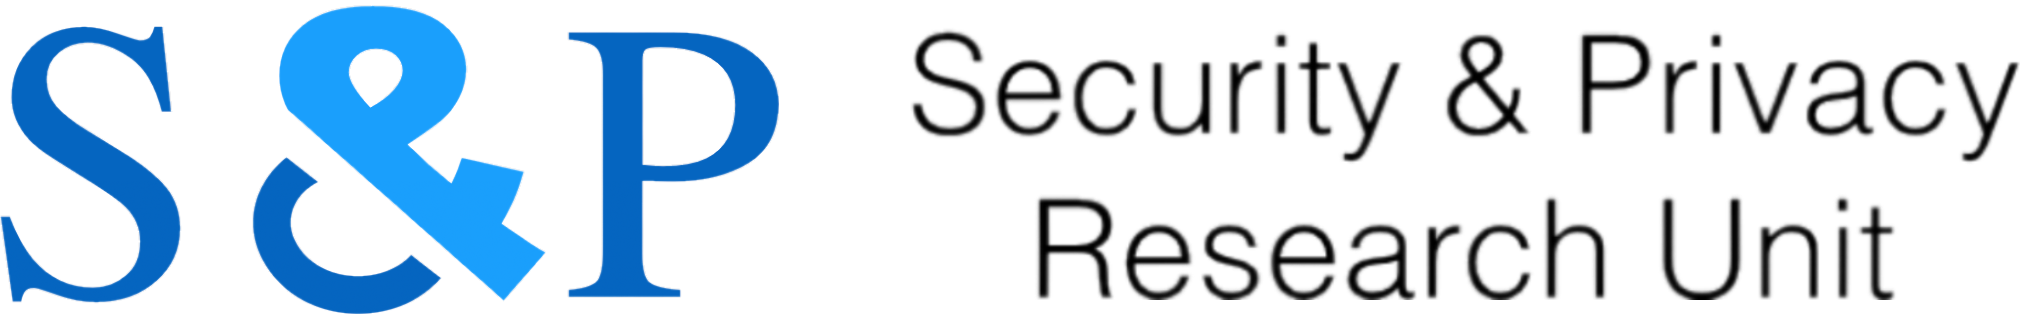 Security and Privacy Research Unit